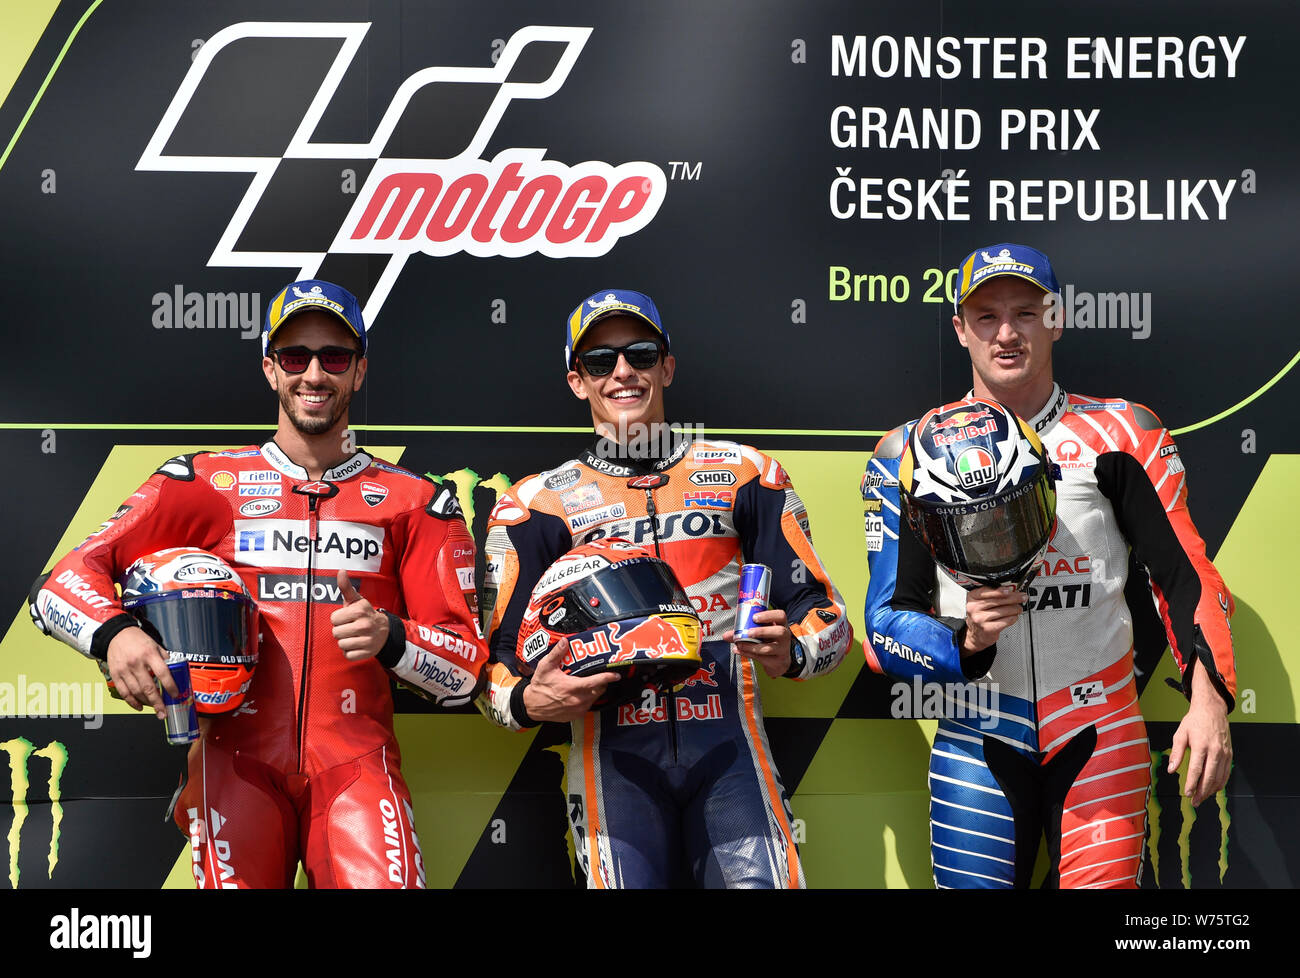 Brno, Czech Republic. 04th Aug, 2019. Road racers L-R Andrea Dovizioso  (Italy), Marc Marquez (Spain) and Jack Miller (Australia) and seen on the  podium during the Czech Republic motorcycle Grand Prix 2019